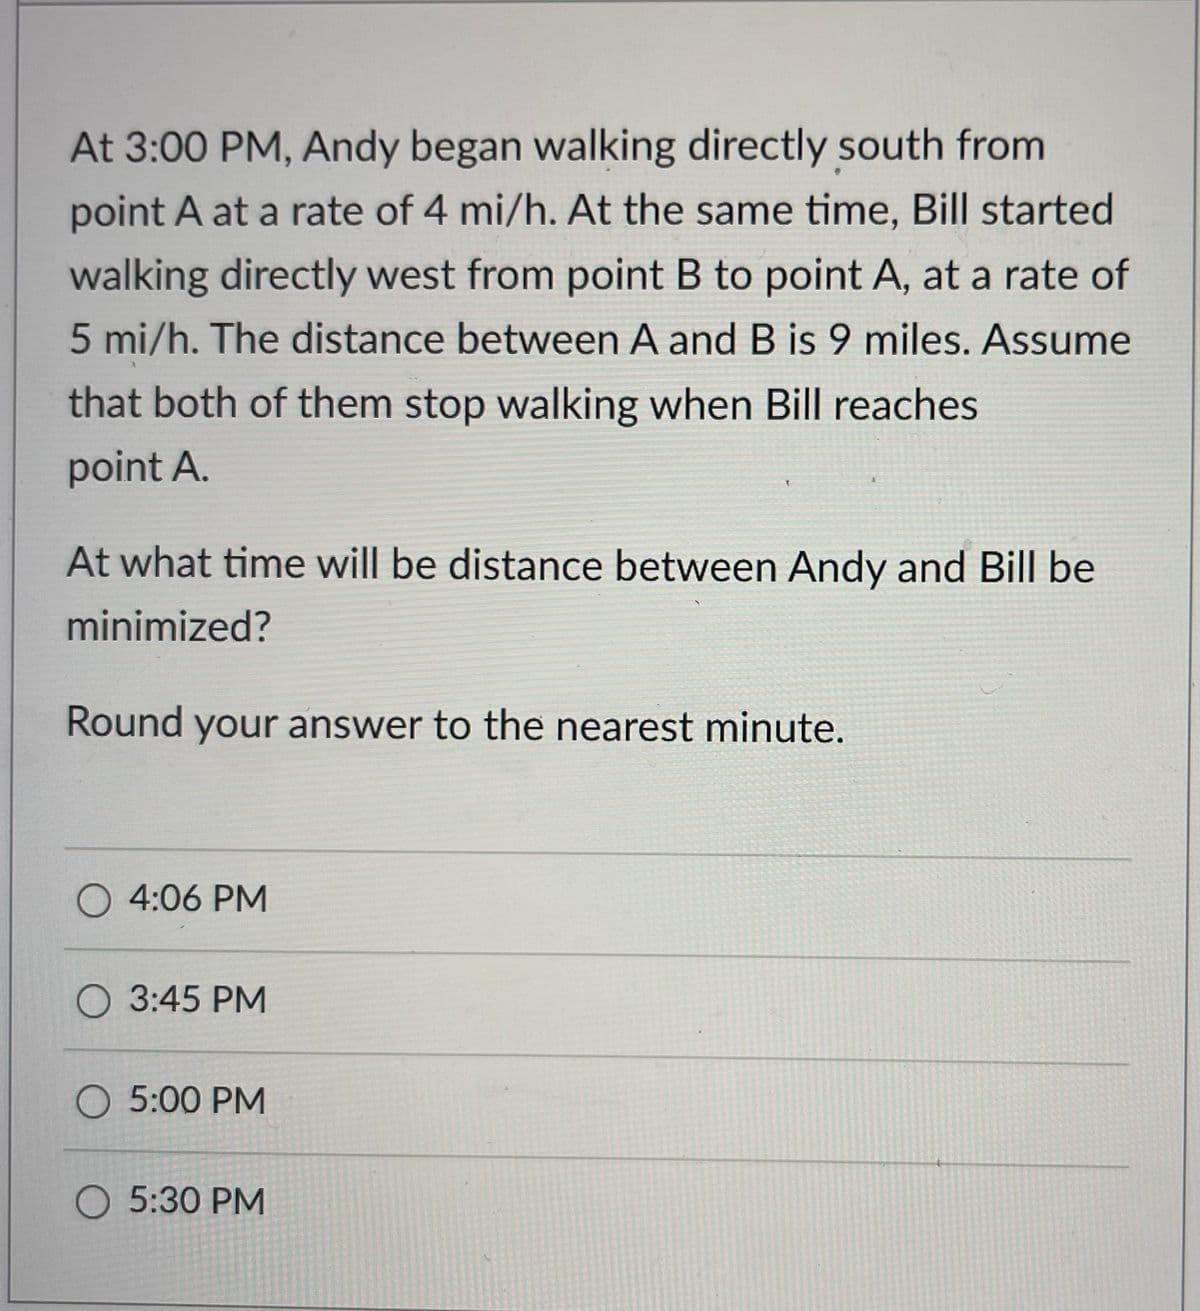 At 3:00 PM, Andy began walking directly south from
point A at a rate of 4 mi/h. At the same time, Bill started
walking directly west from point B to point A, at a rate of
5 mi/h. The distance between A and B is 9 miles. Assume
that both of them stop walking when Bill reaches
point A.
At what time will be distance between Andy and Bill be
minimized?
Round your answer to the nearest minute.
O 4:06 PM
O 3:45 PM
O 5:00 PM
O 5:30 PM